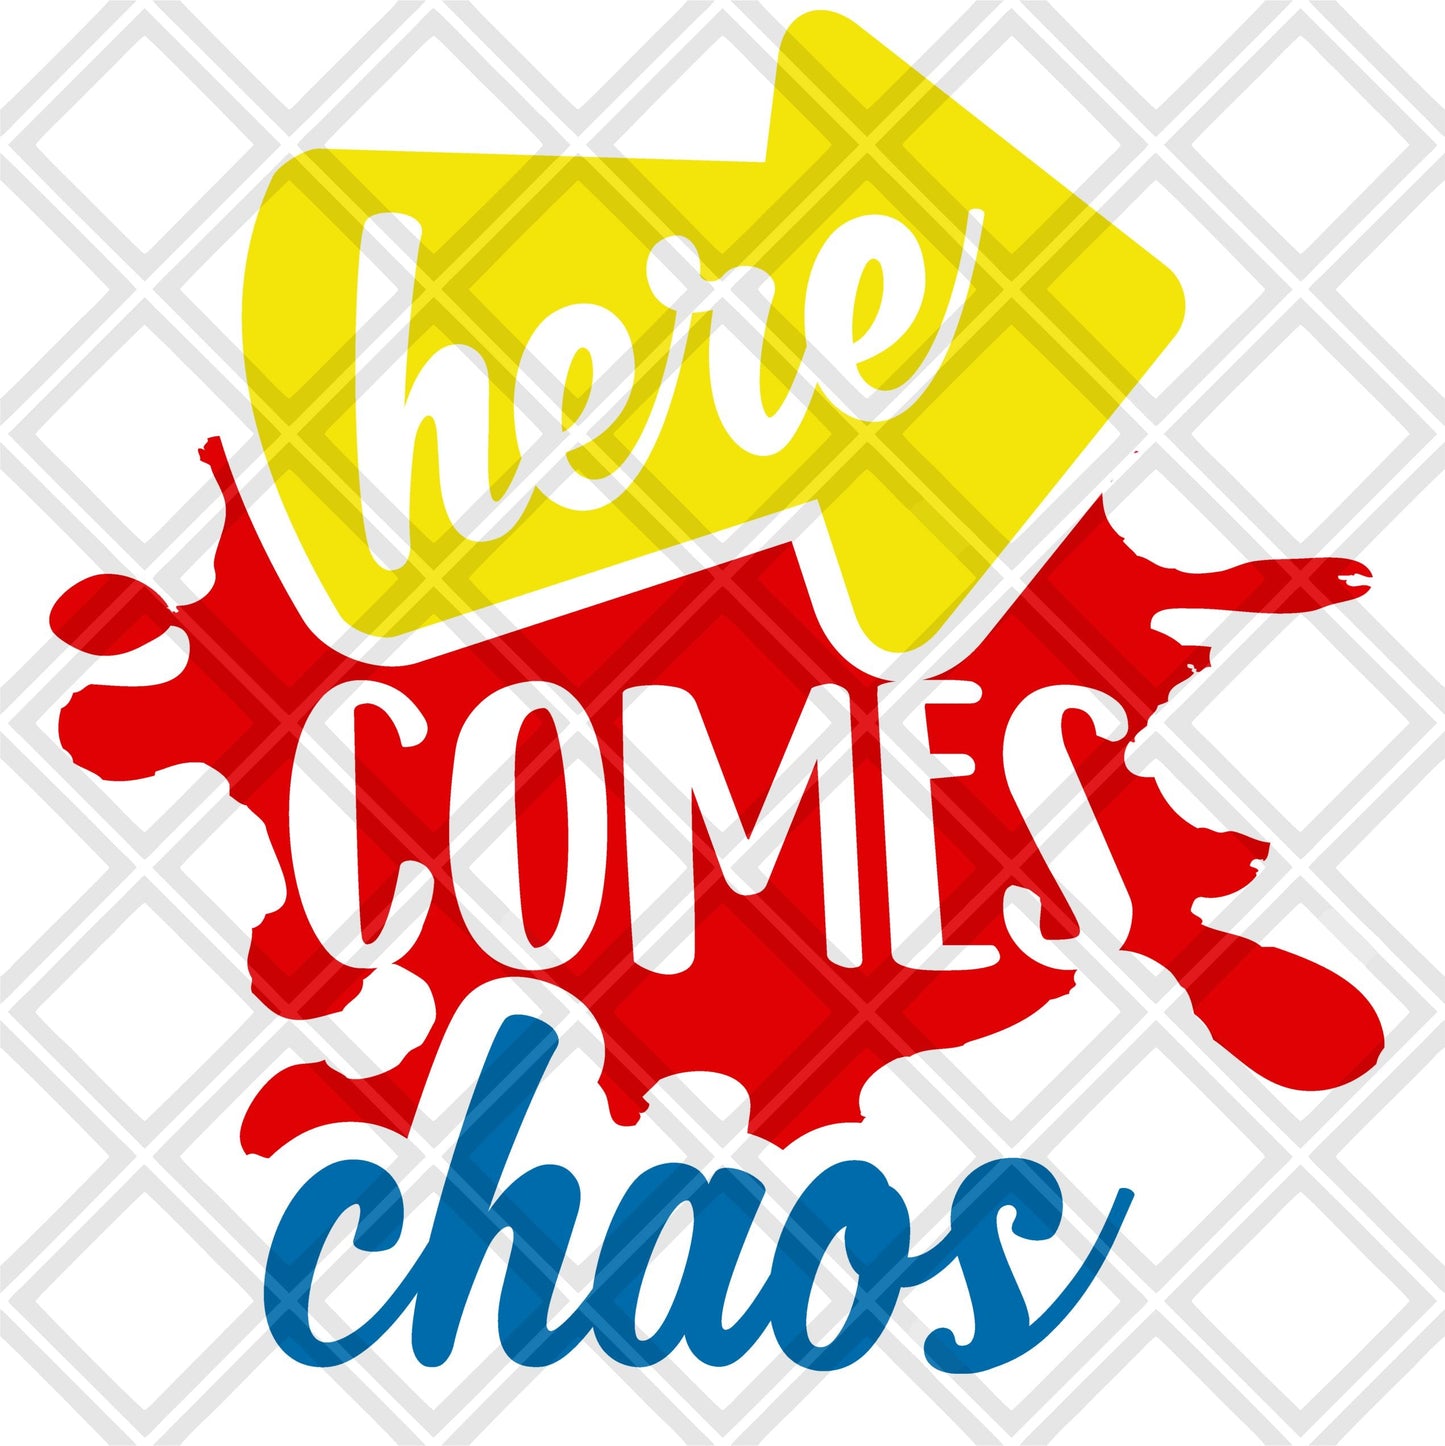 HERE COMES CHAOS NO FRAME Digital Download Instand Download